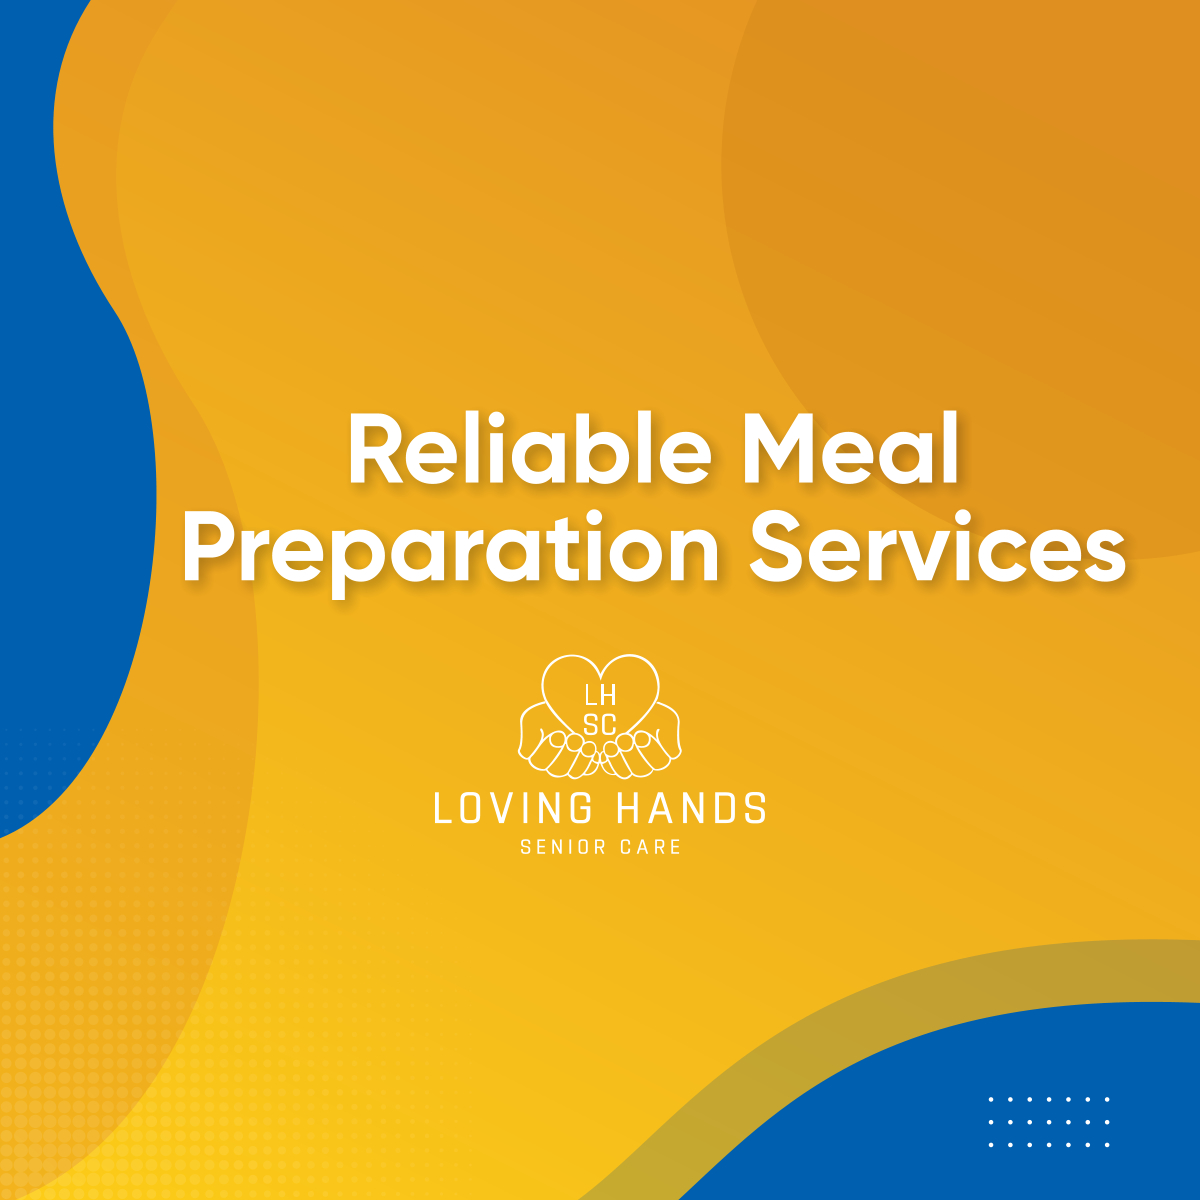 Proper meal preparation can help seniors reduce their risk of chronic illness and age-related problems. We offer non-medical home care services to help your elderly loved ones prepare healthy meals at home.

Call us at  813-200-8842 for inquiries. 

#TampaFL #MealPreparation